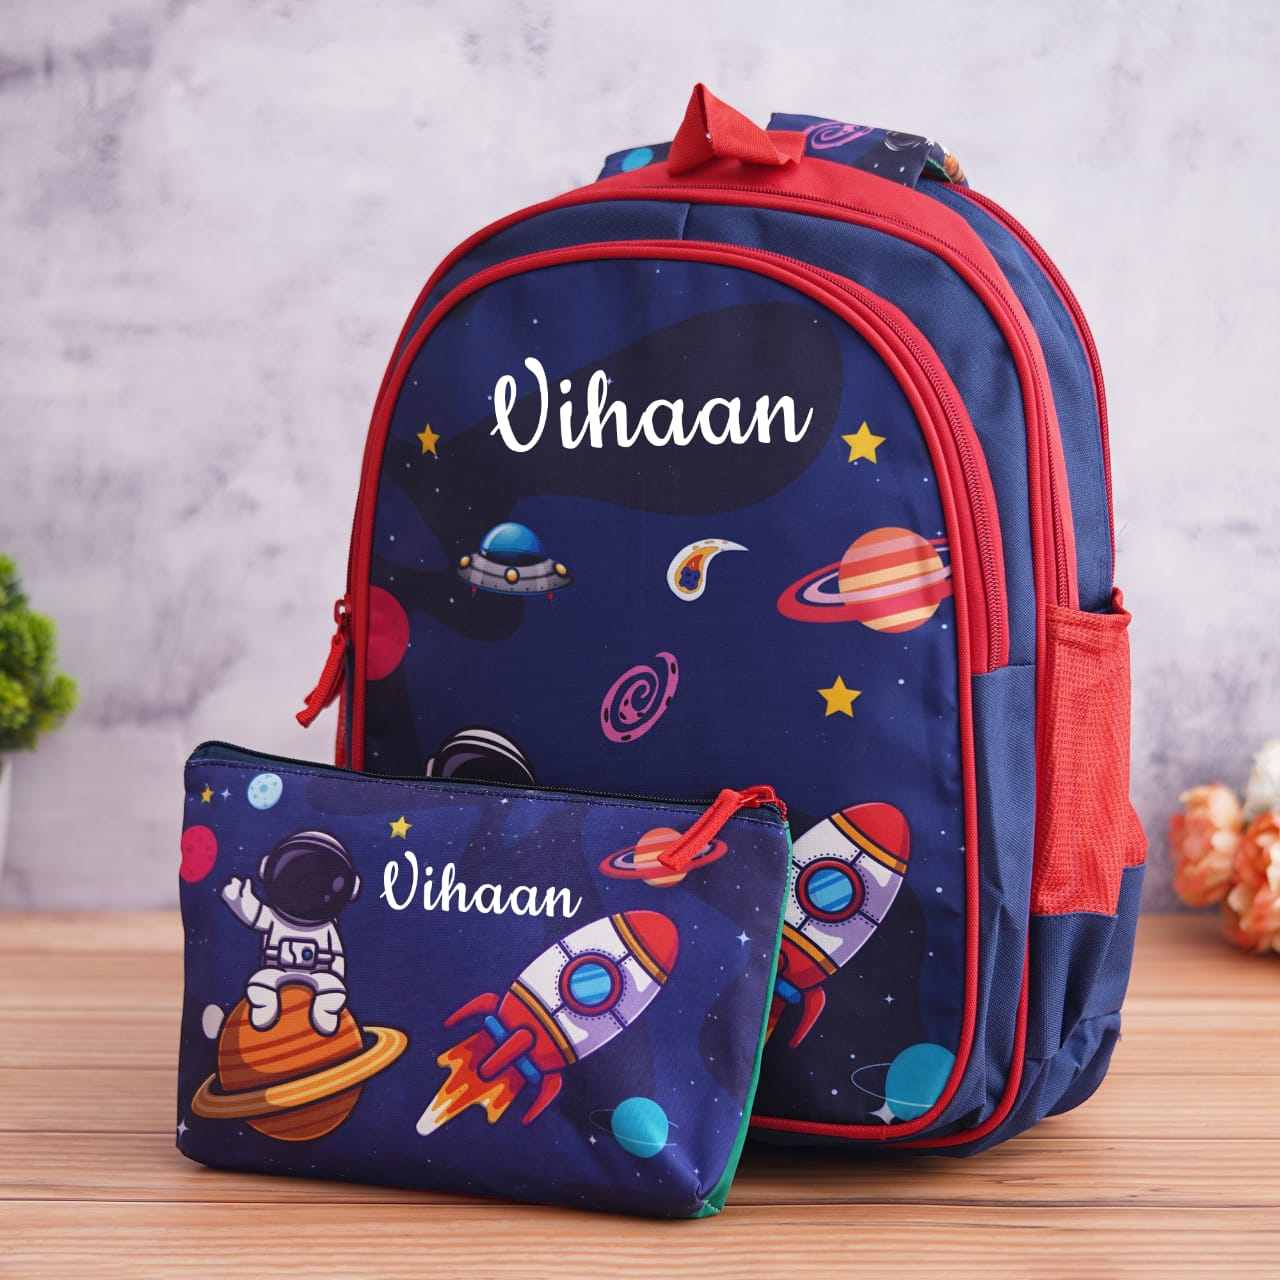 10 school bags you can buy now in the Philippines